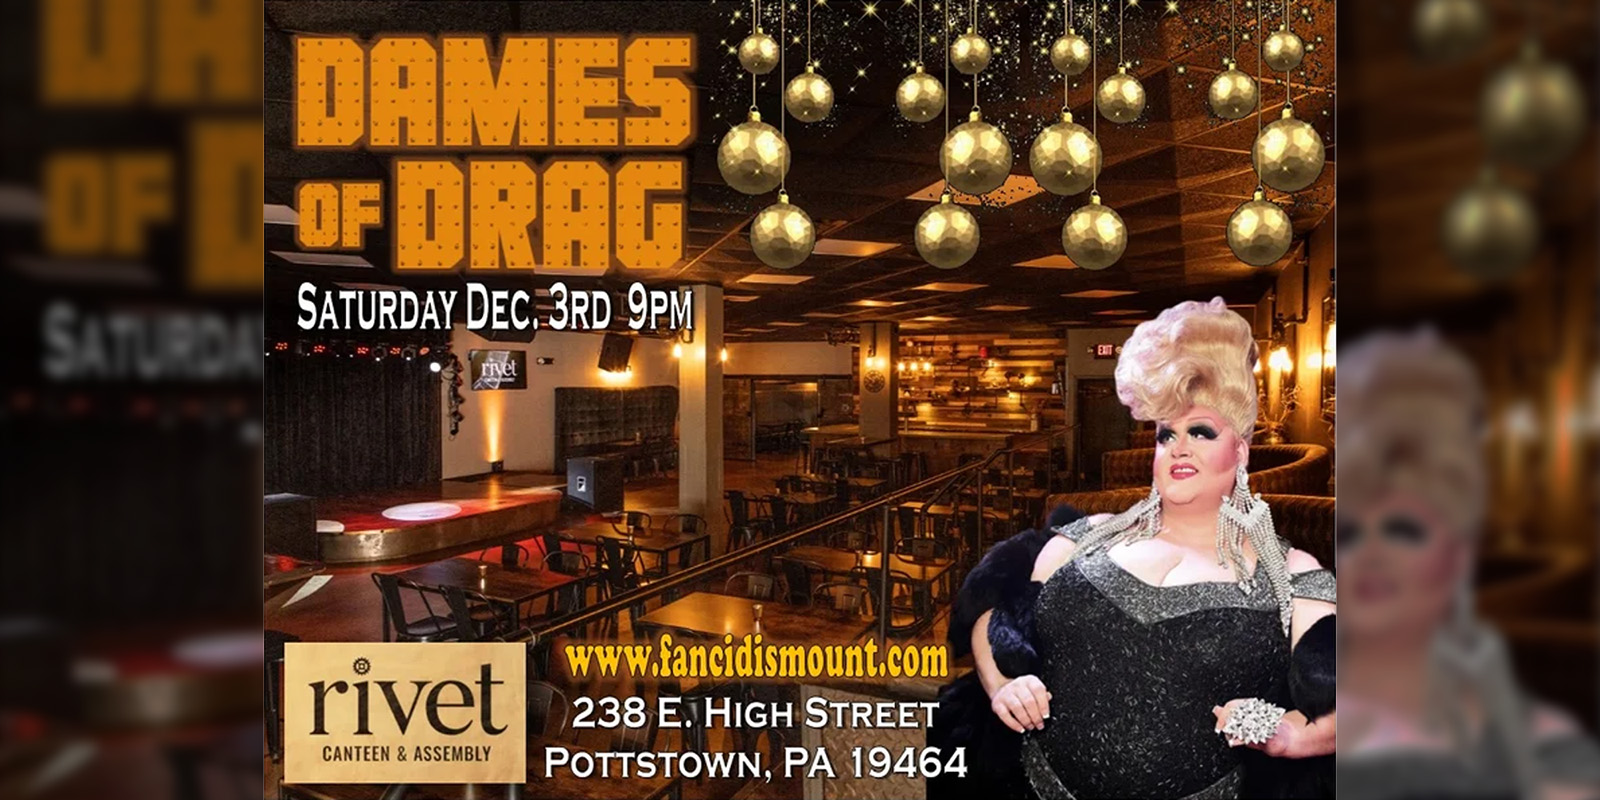 Dames of Drag: Holiday Celebration - Live at Rivet: Canteen & Assembly on Saturday, December 3rd! Doors open at 8PM and the party starts at 9PM!